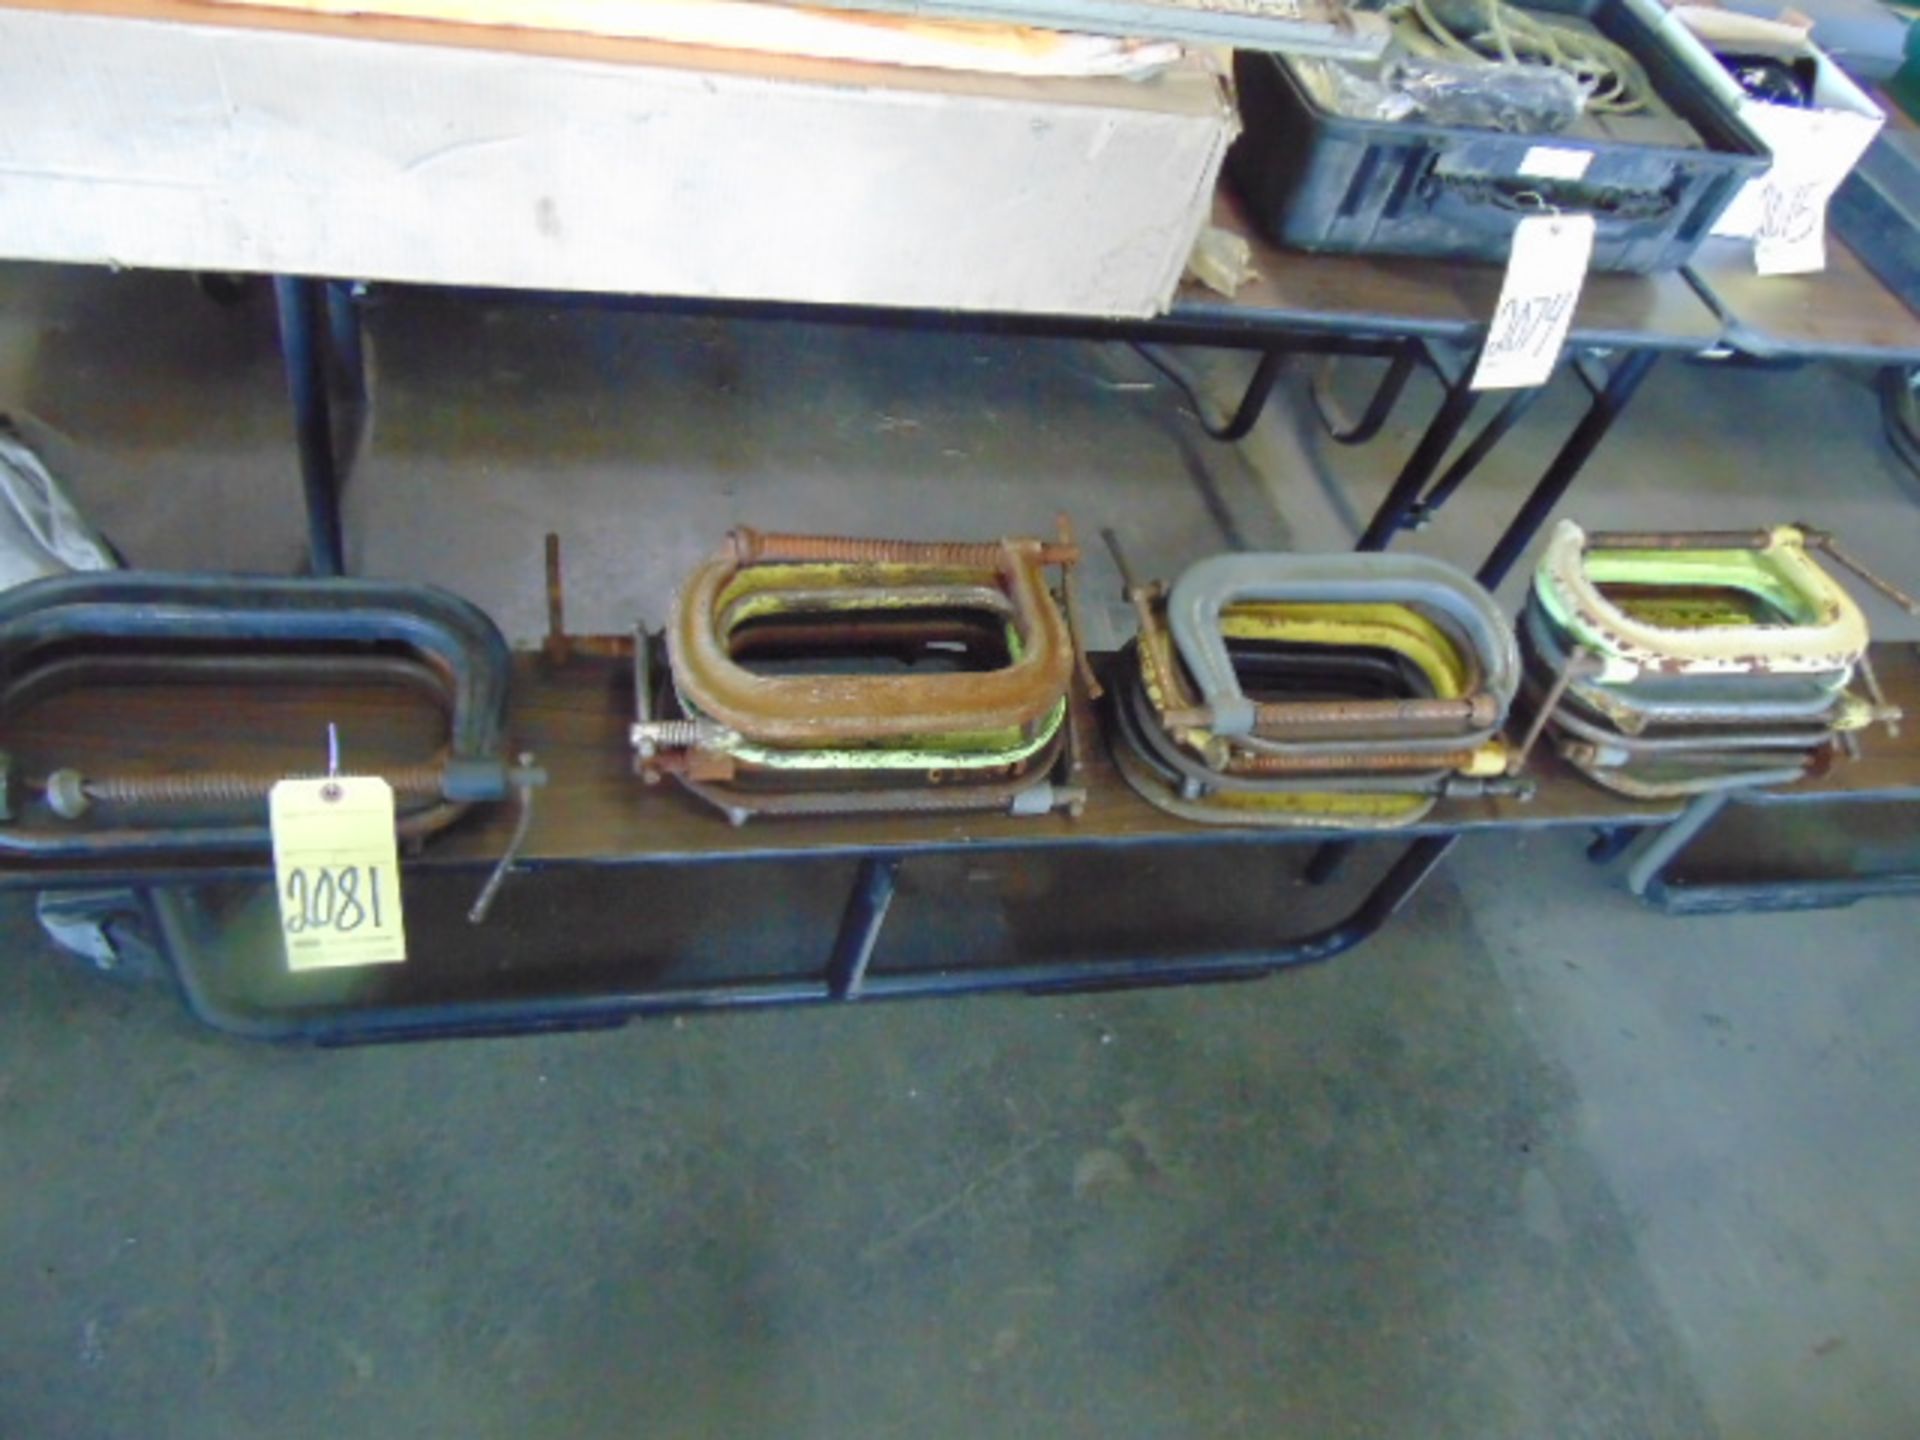 LOT OF C-CLAMPS, assorted